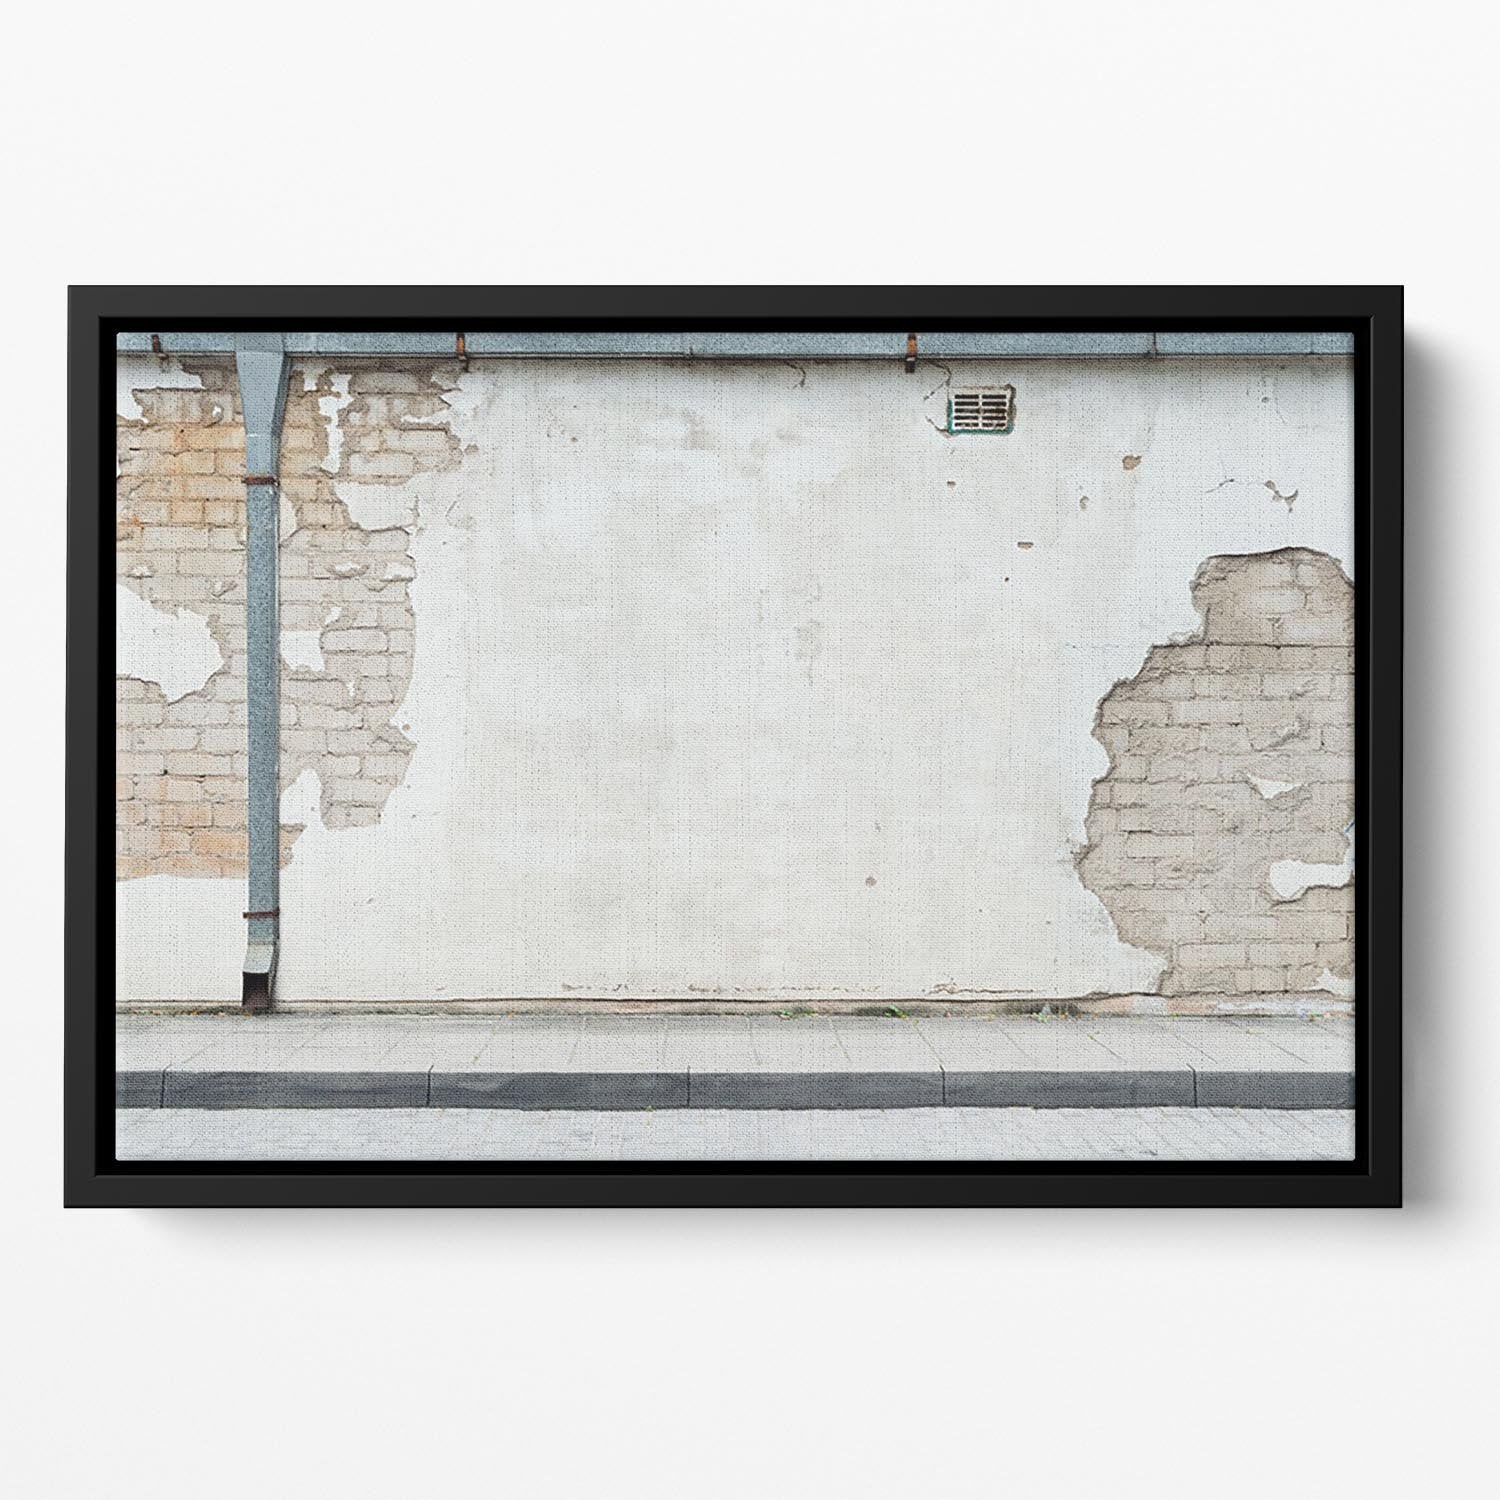 Aged street wall background Floating Framed Canvas - Canvas Art Rocks - 2